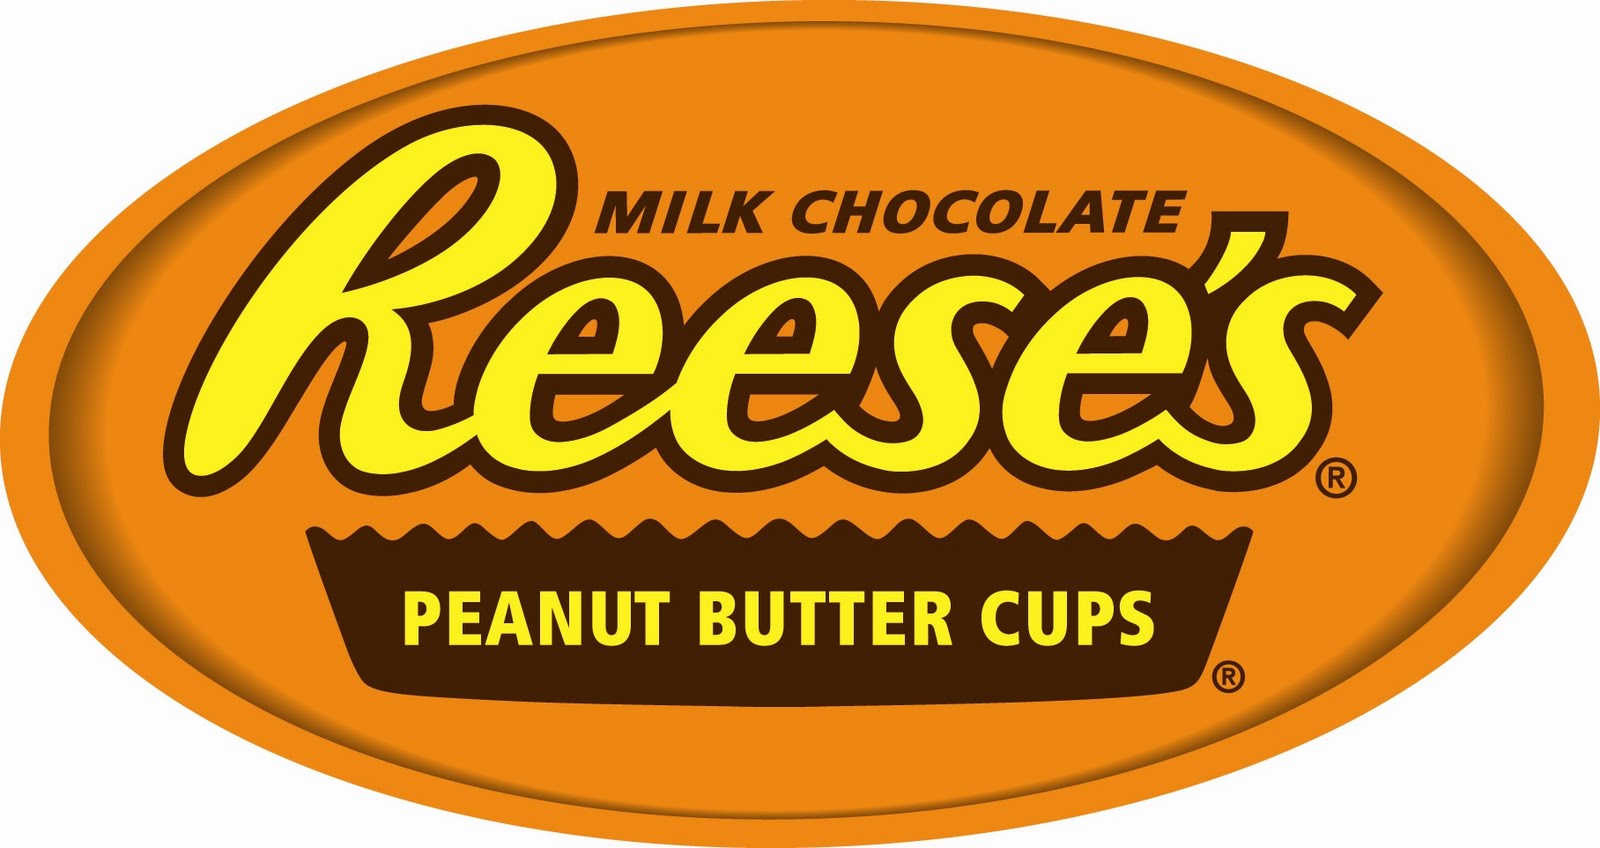 SaudiTrend: 12 June 2011 Use reese's pieces logo and thousands of othe...